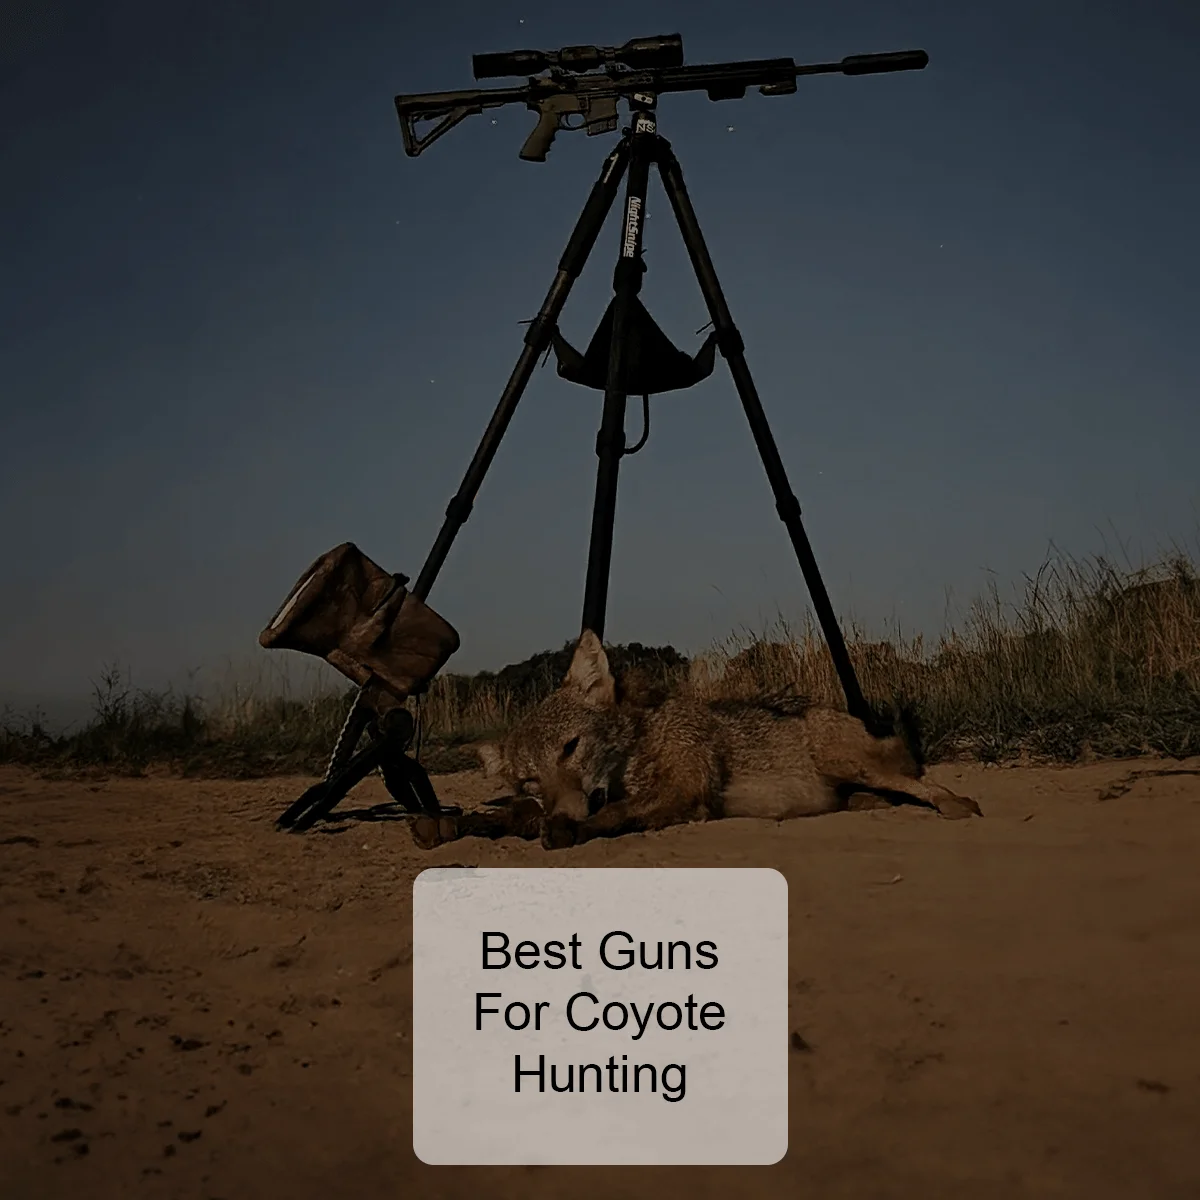 Best Guns for Coyote Hunting